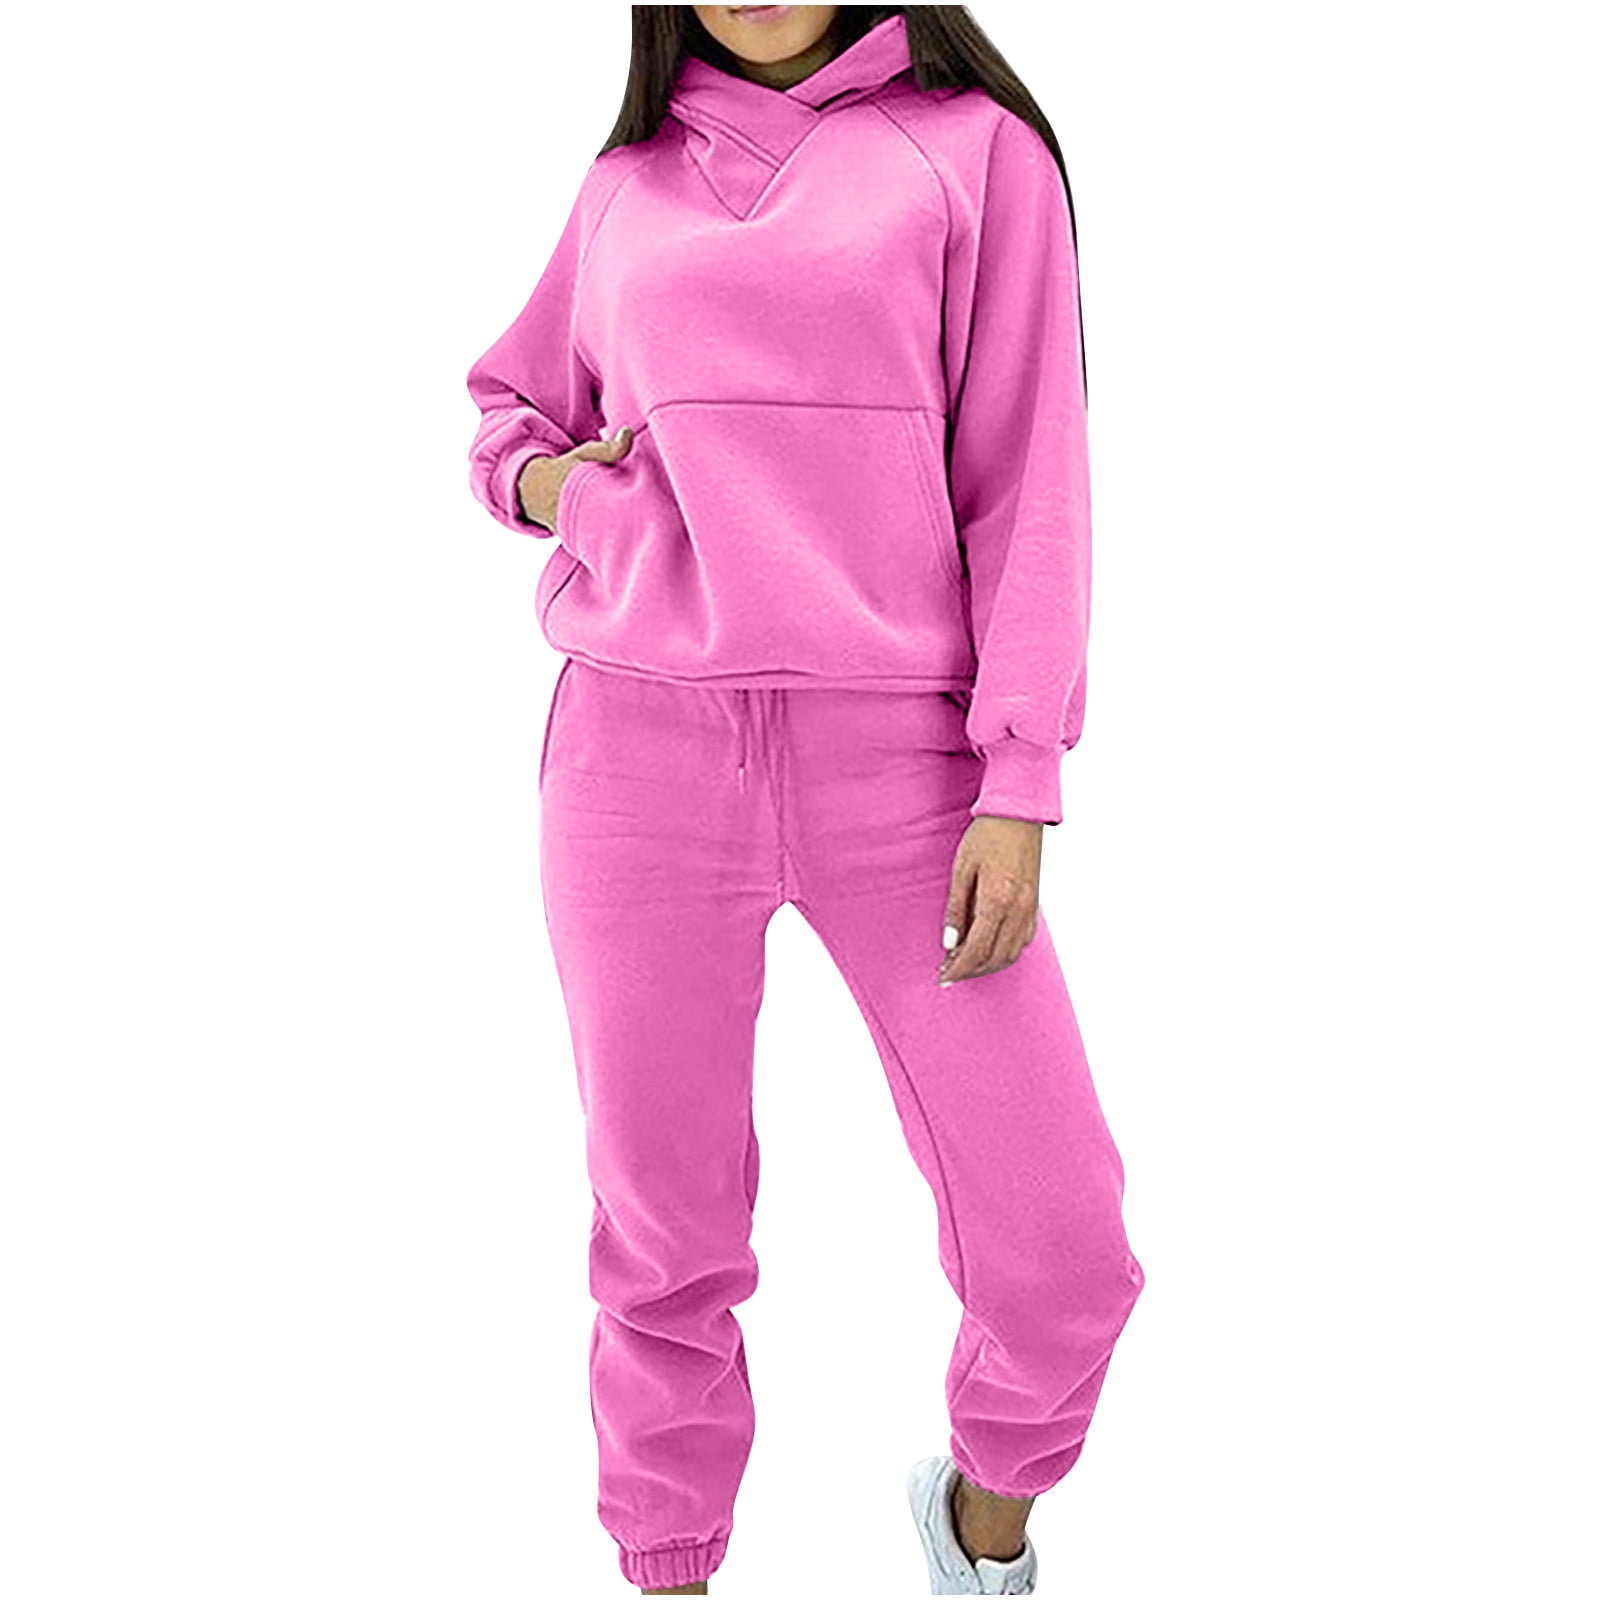 Tracksuit Womens Full Set Sale Clearance,Ladies Hoodies and Jogging Bottoms  Tracksuits Teenager Girls Track Suit Loungewear Running Sweat Suit Walking  Hiking Yoga Gym Set 